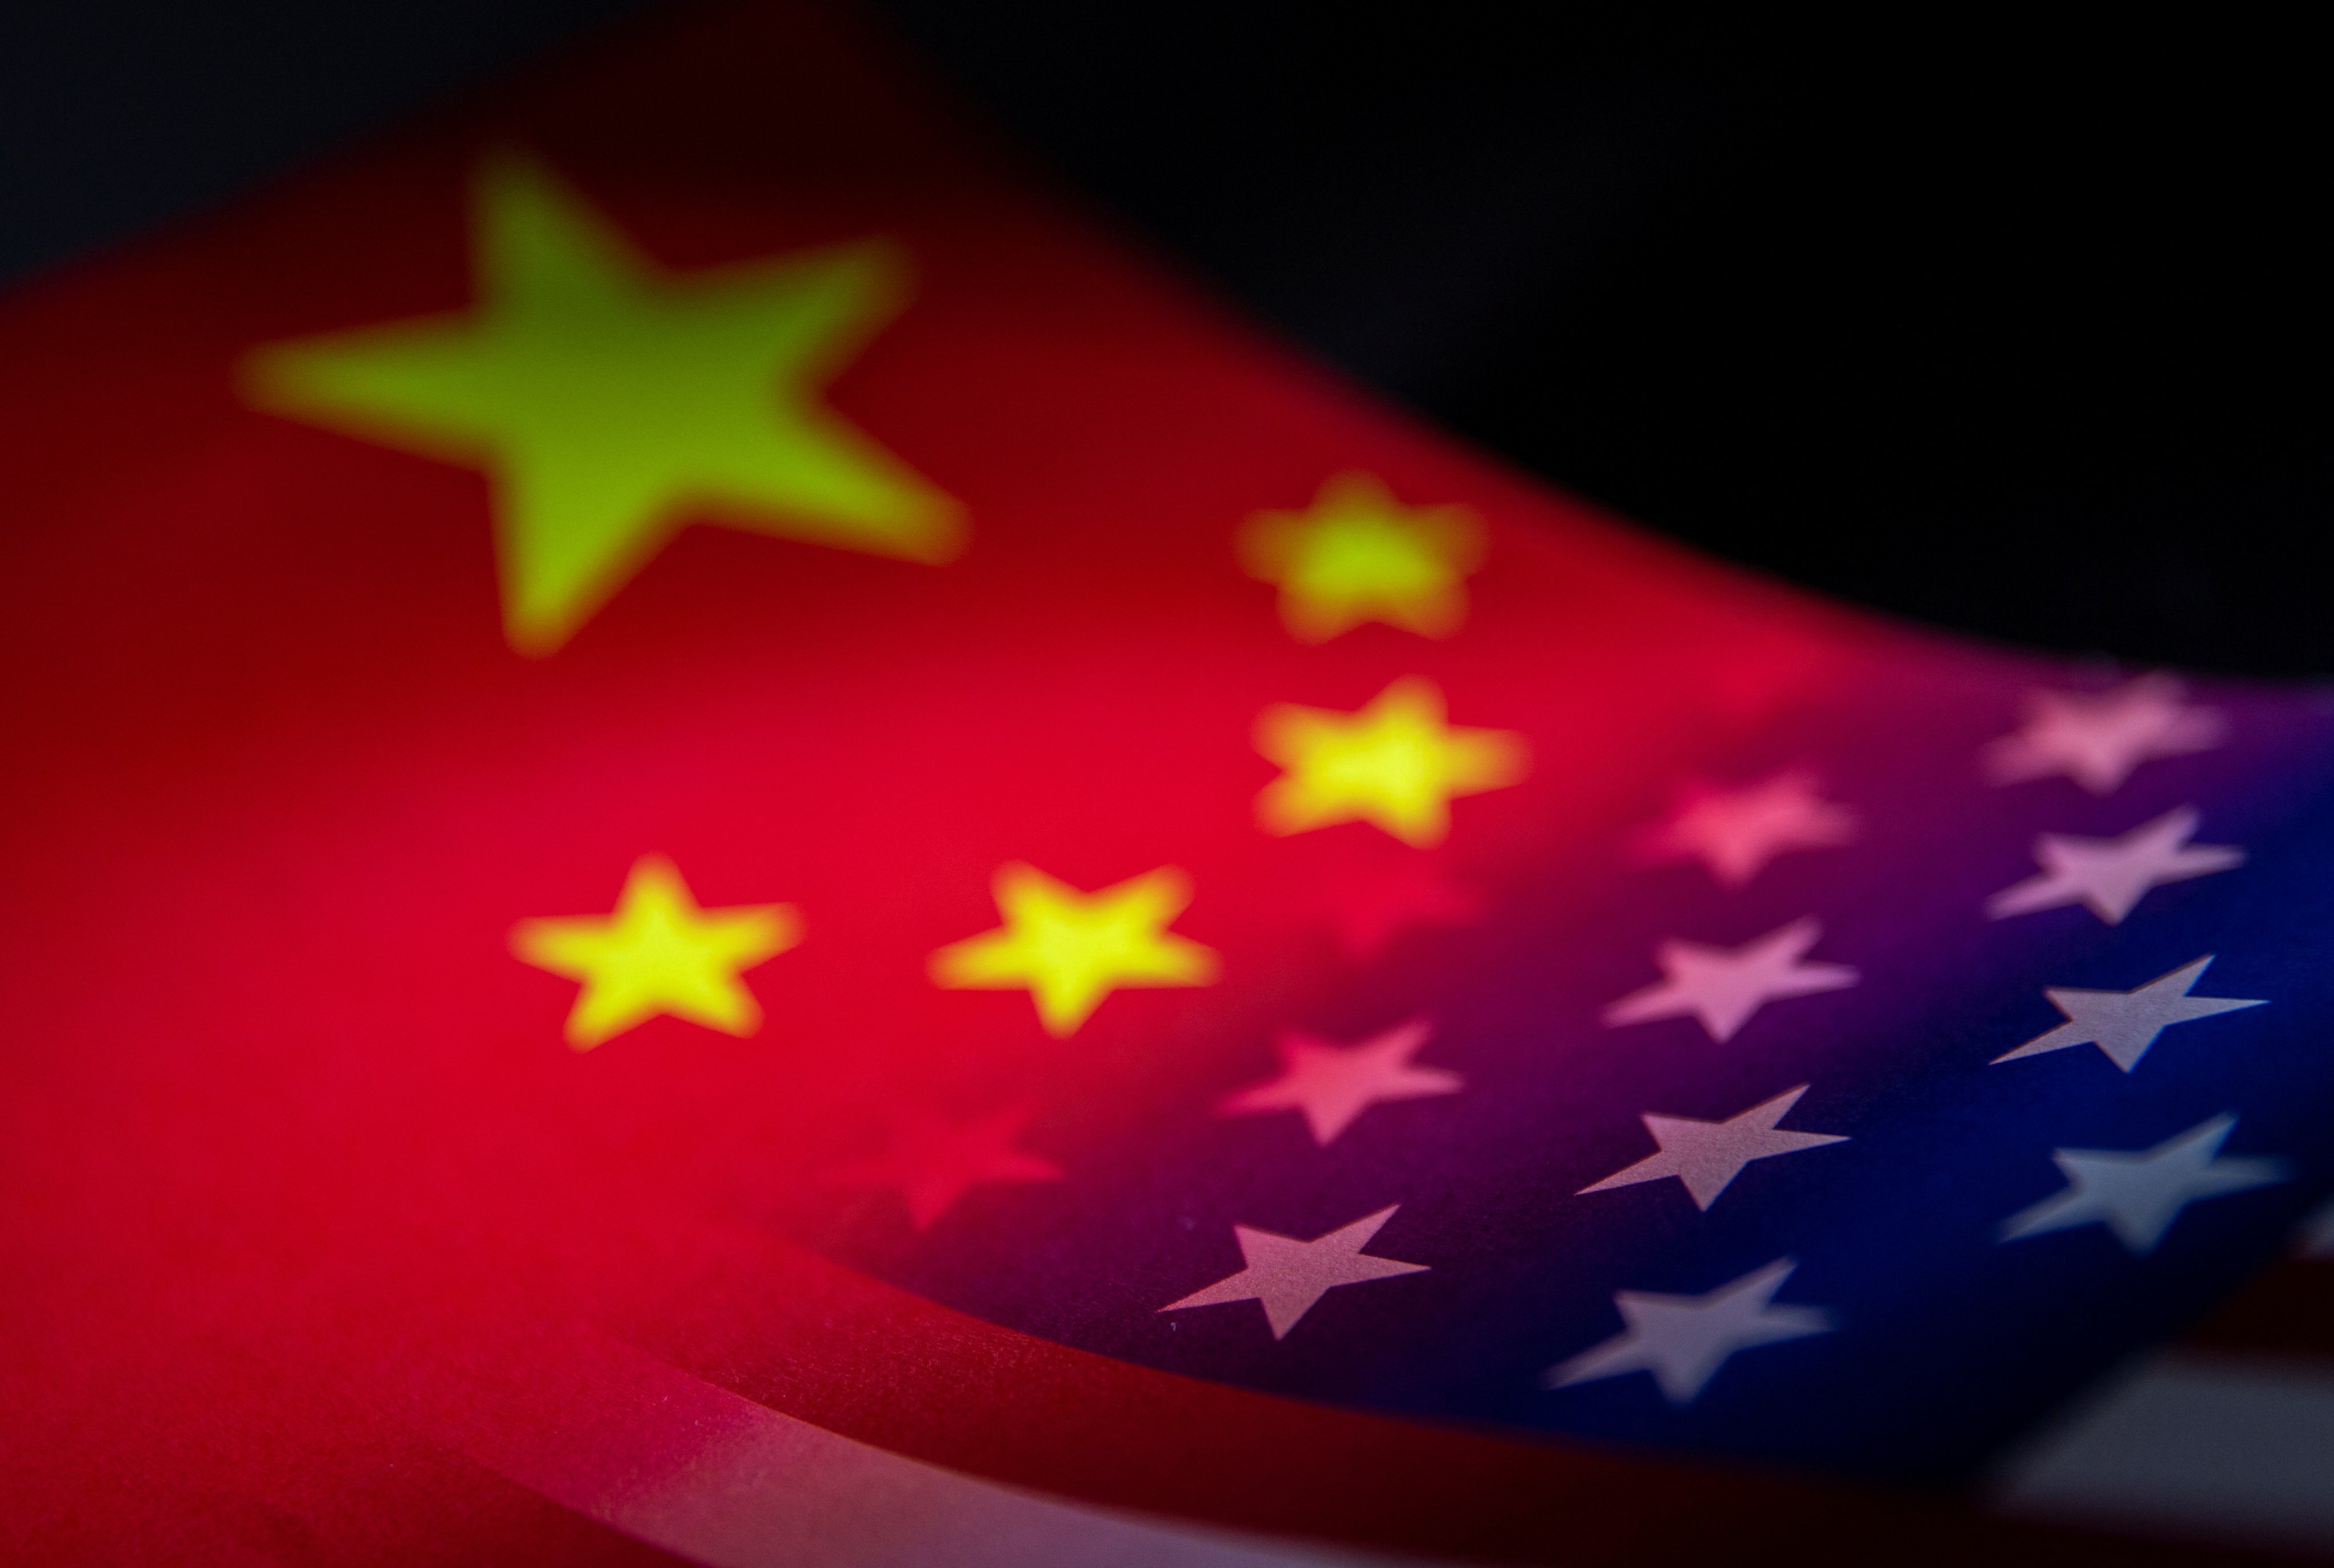 US firms operating in China are said to be taking a wait-and-see approach at a time when Beijing is looking to lure back investors. Photo: Reuters